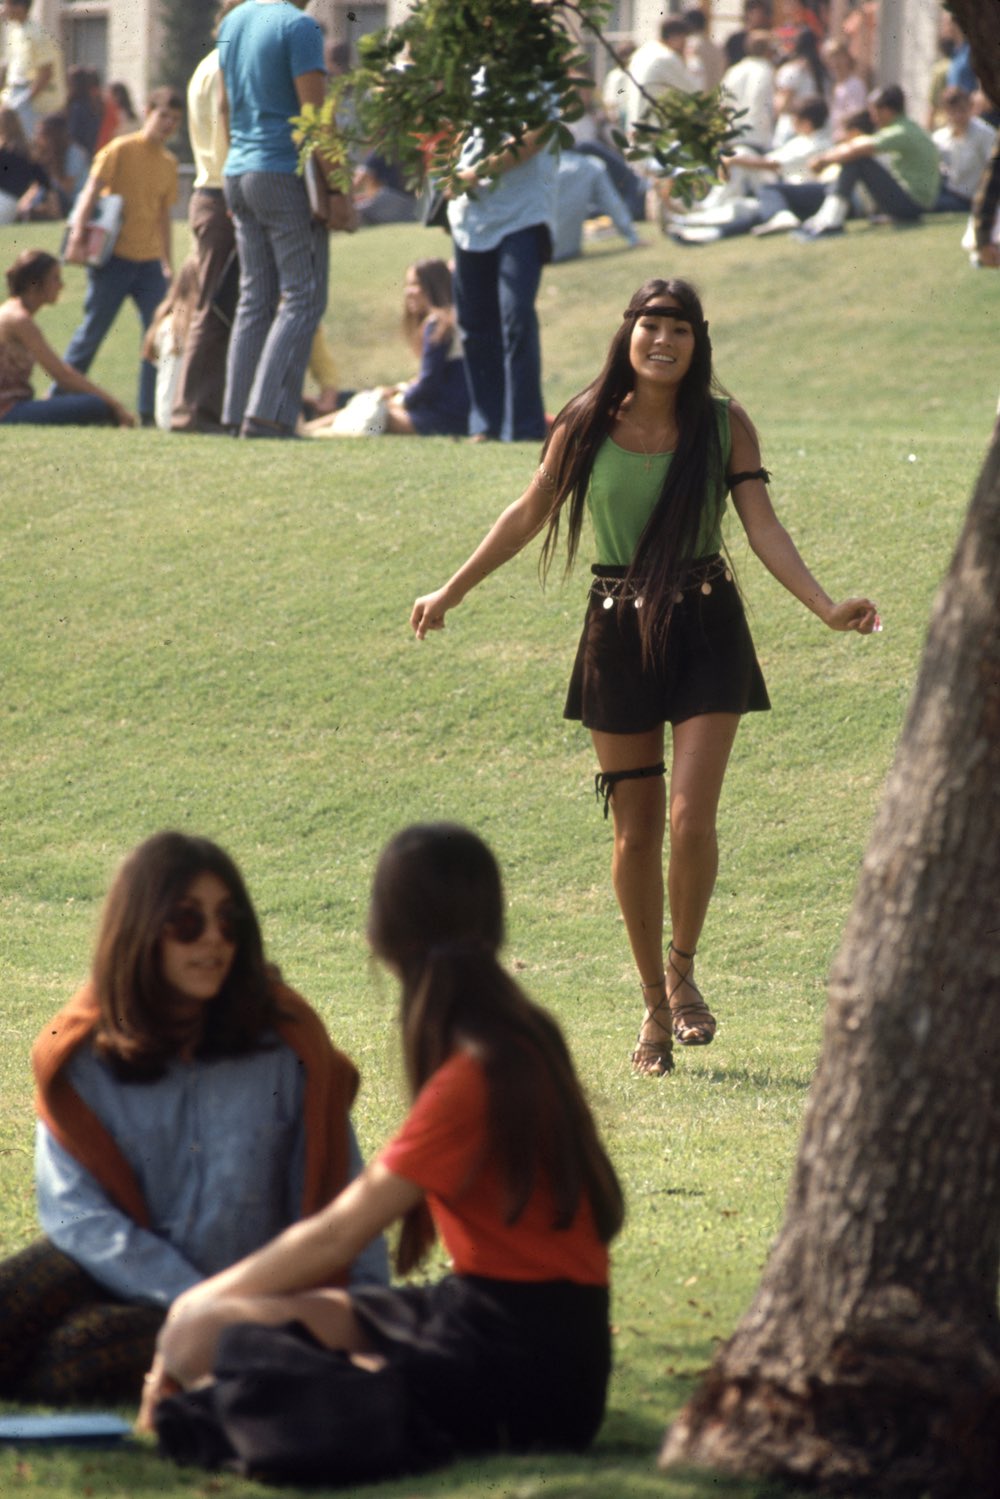 Subject: Southern California high school student walking toward other classmates while wearing the "Mini Jupe" skirt. California October 1969 Photographer- Arthur Schatz Time Inc Owned merlin- 1201968